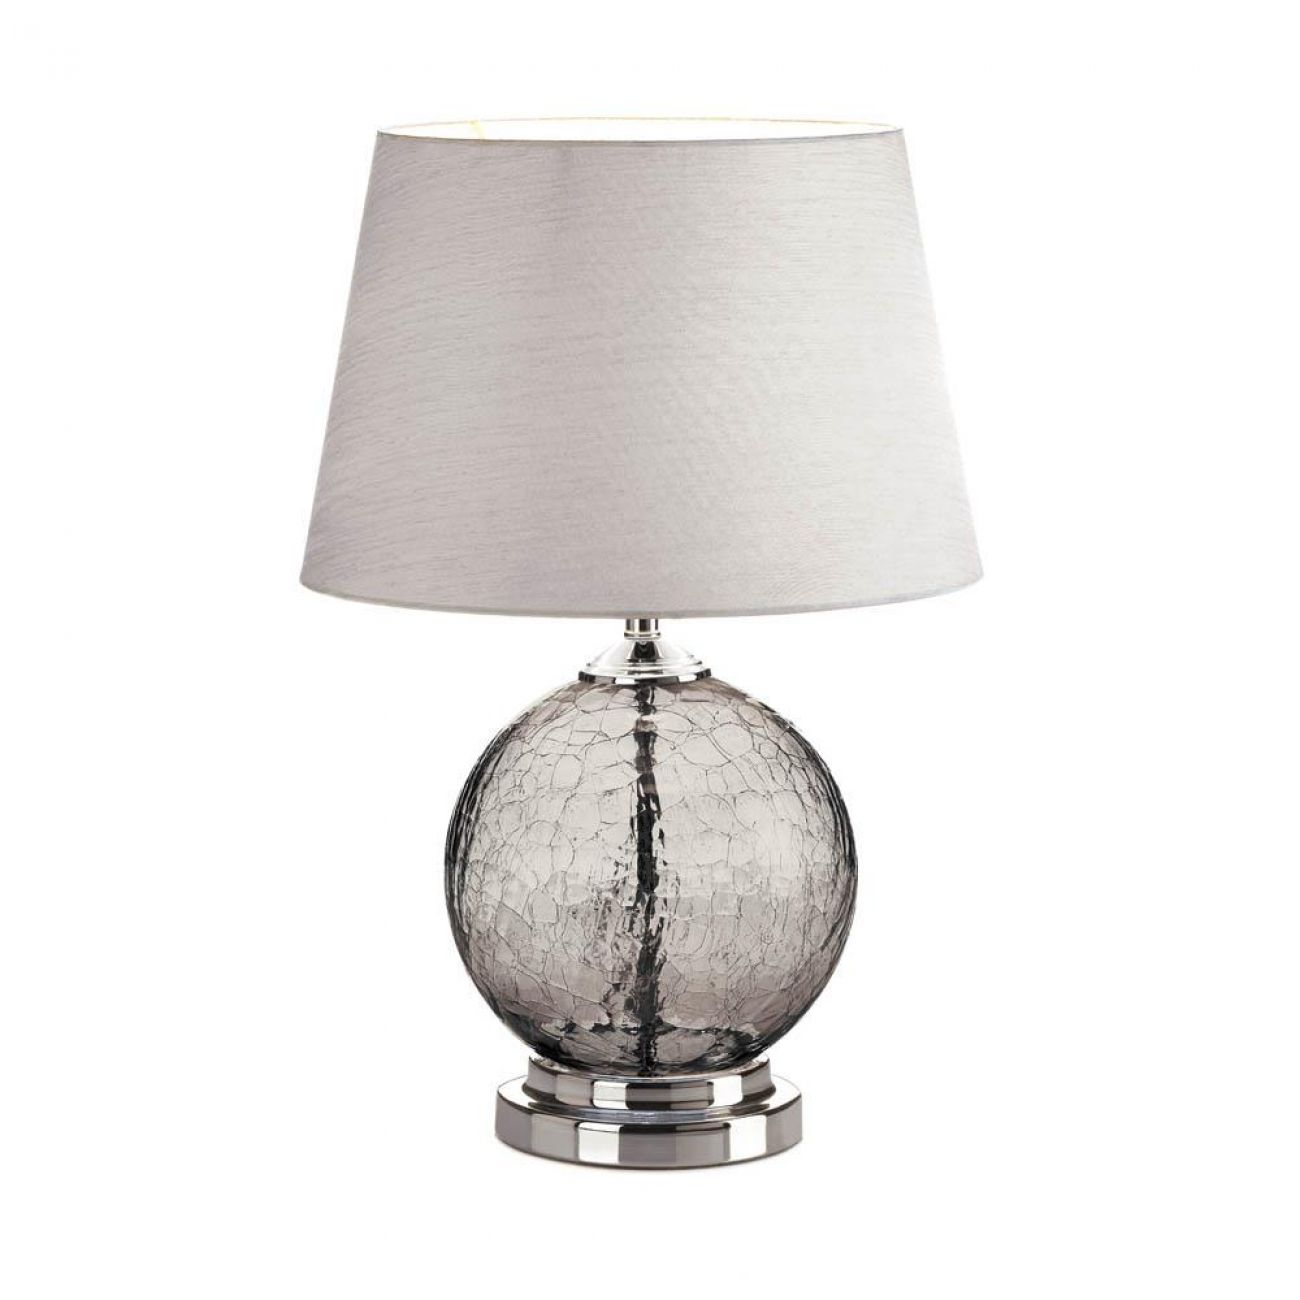 Gray Crackle Glass Table Lamp